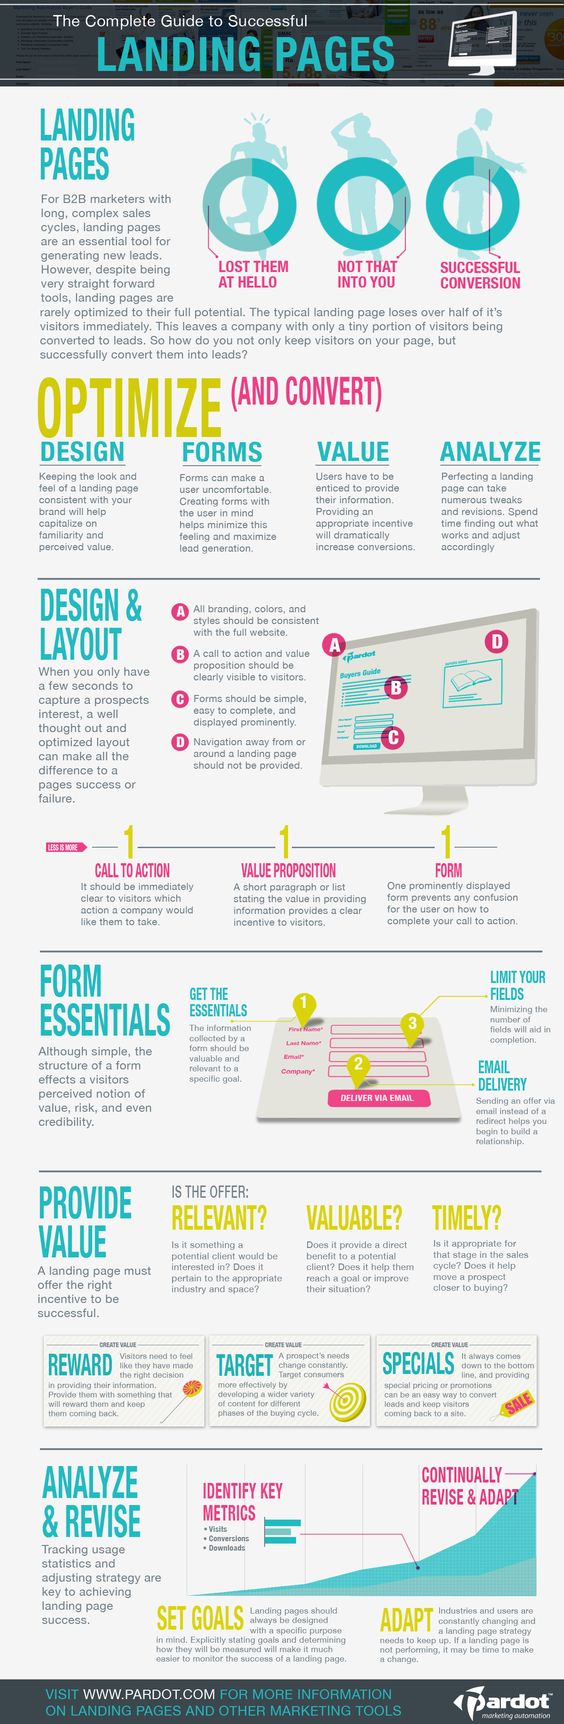 How To Make A Great Landing Page For Your Business Website For more Social Media marketing resources visit #SMM #socialmediamarketing #marketing #business #startup